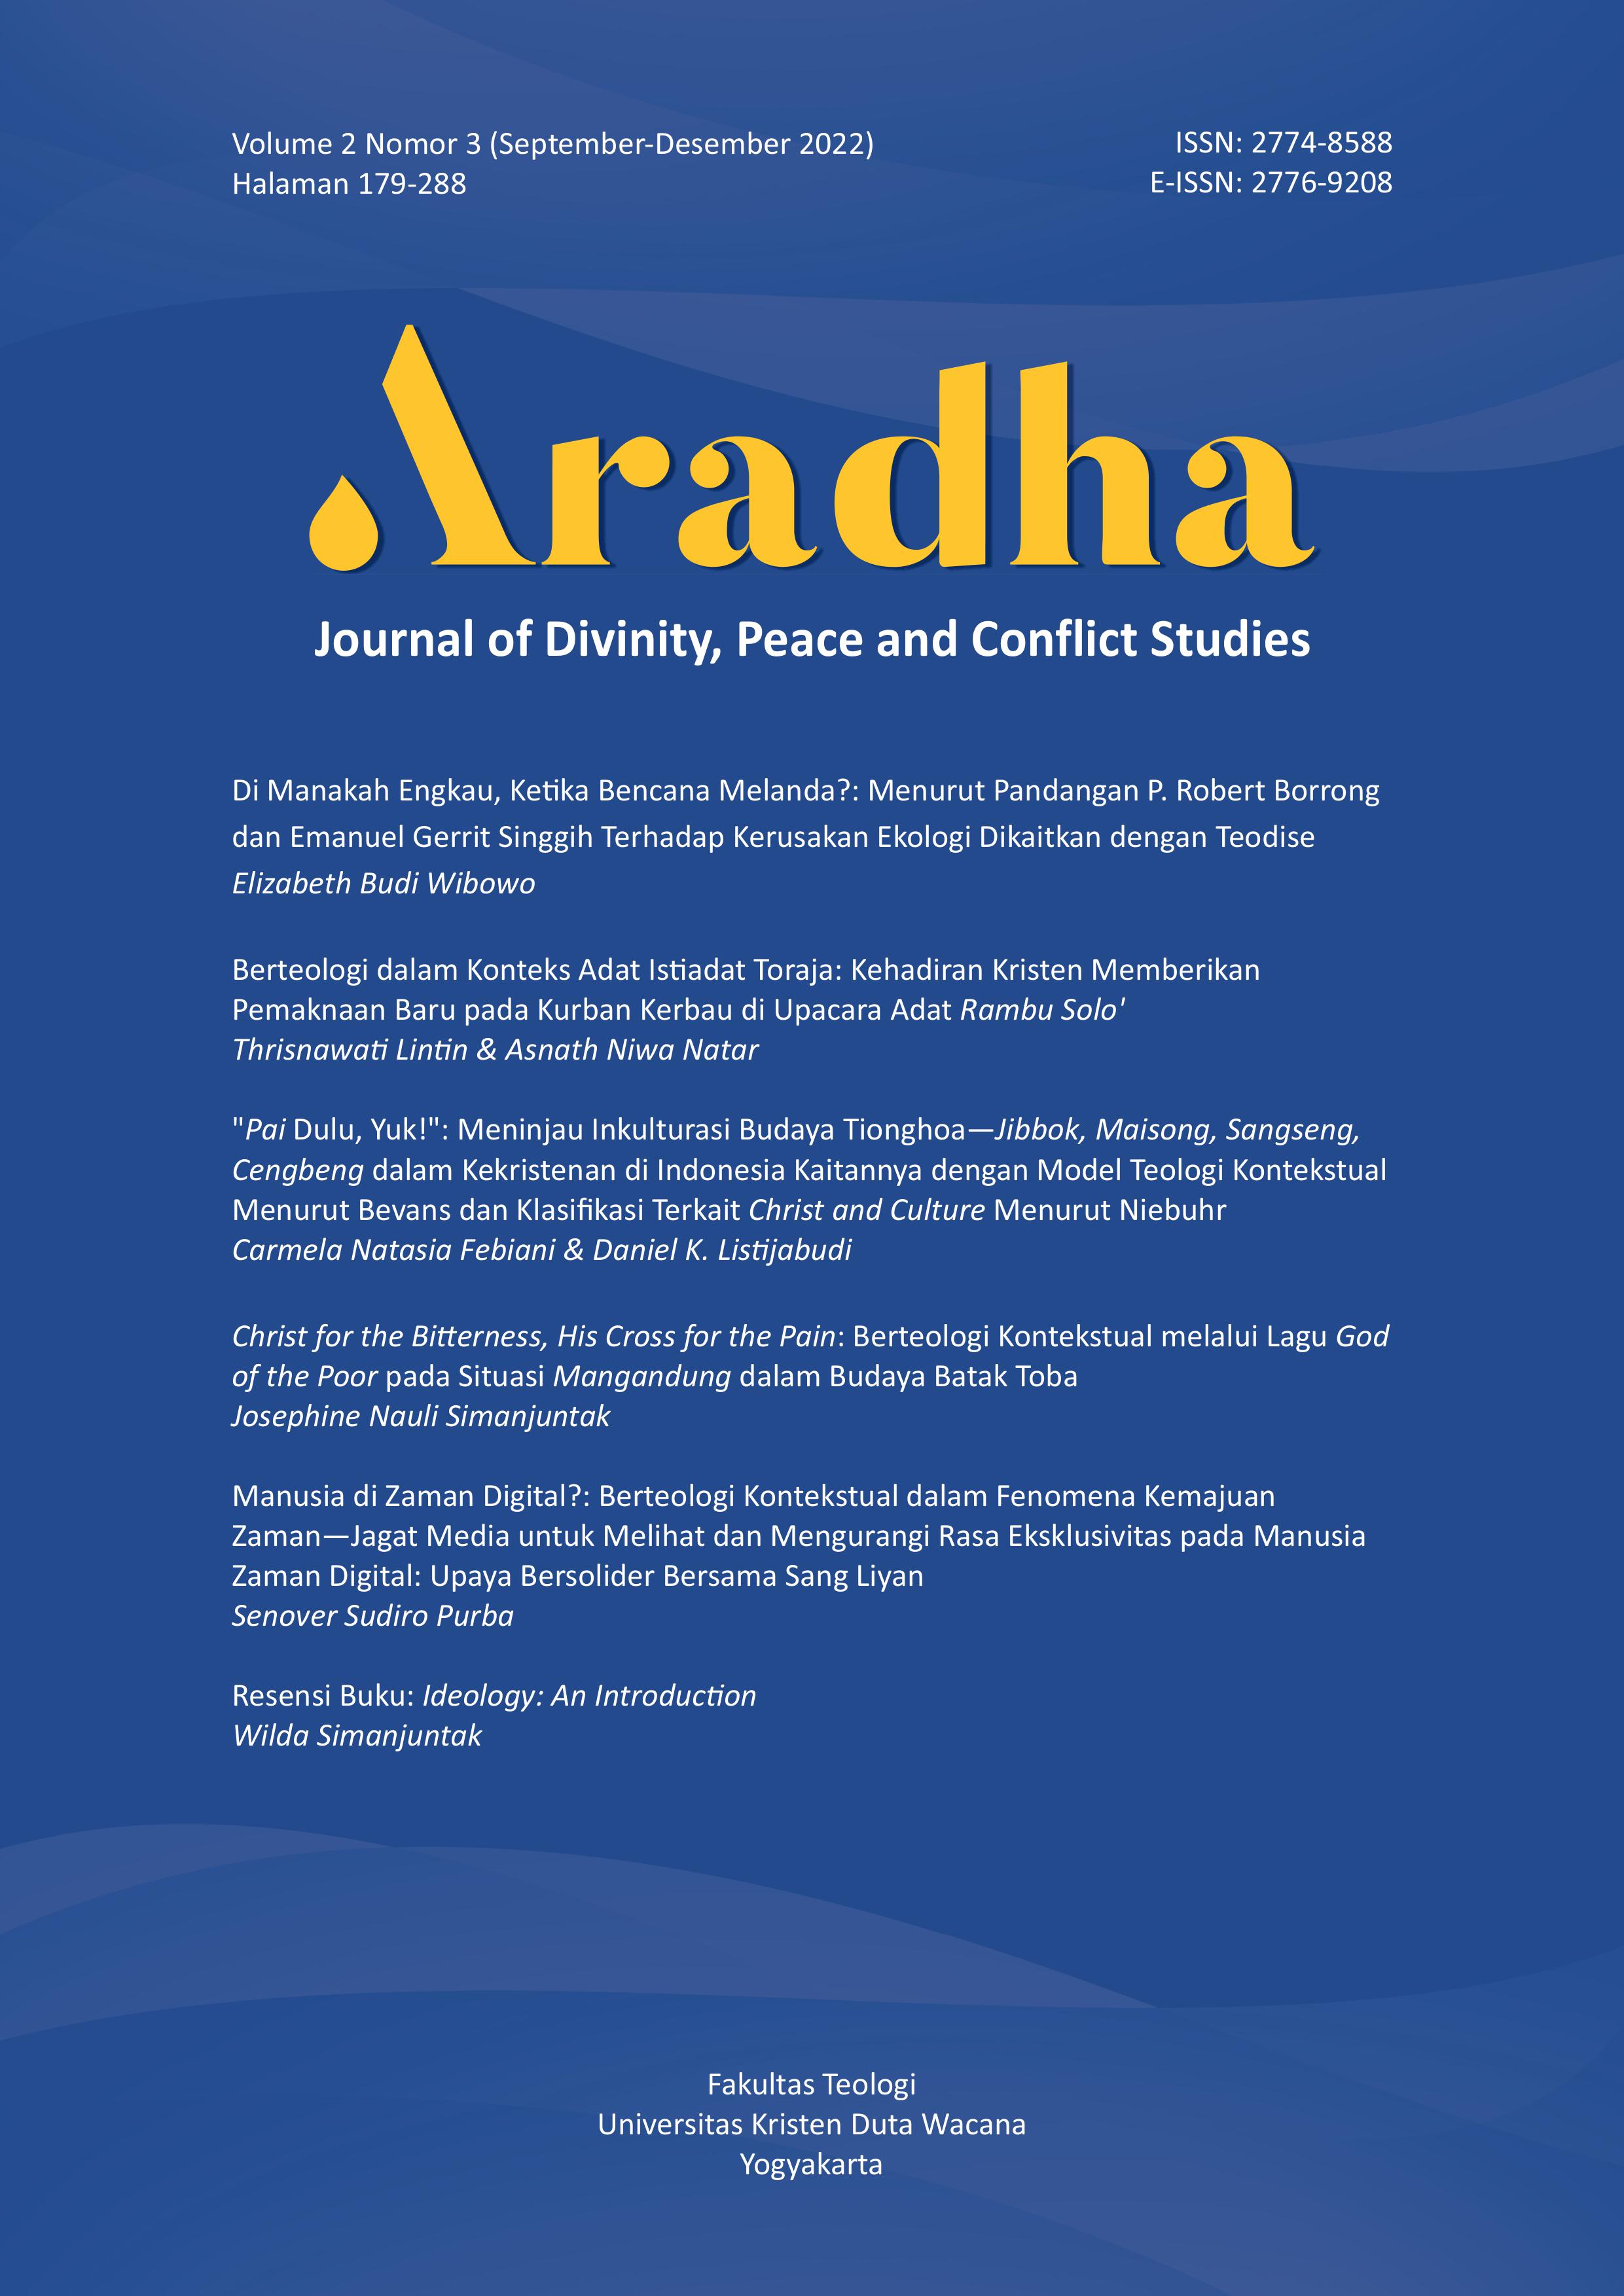 					View Vol. 2 No. 3 (2022): Aradha: Journal Of Divinity, Peace And Conflict Studies 
				